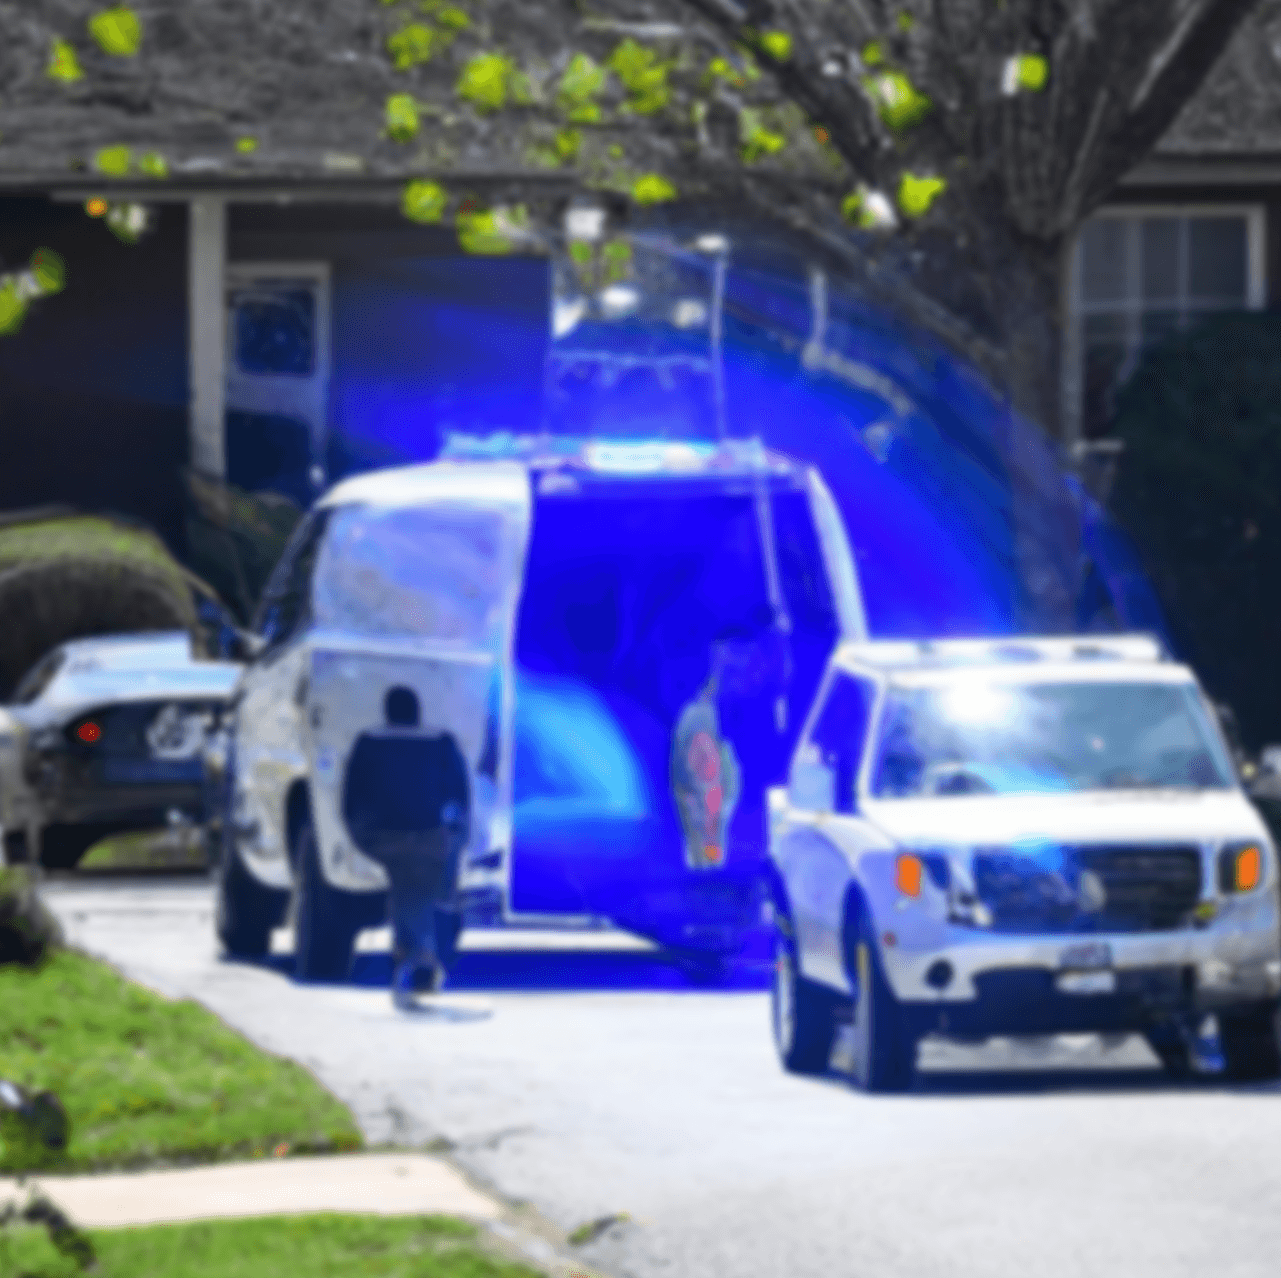 team of technicians arriving at a property in response to an emergency water damage call, with flashing lights, blue van and equipment visible.png